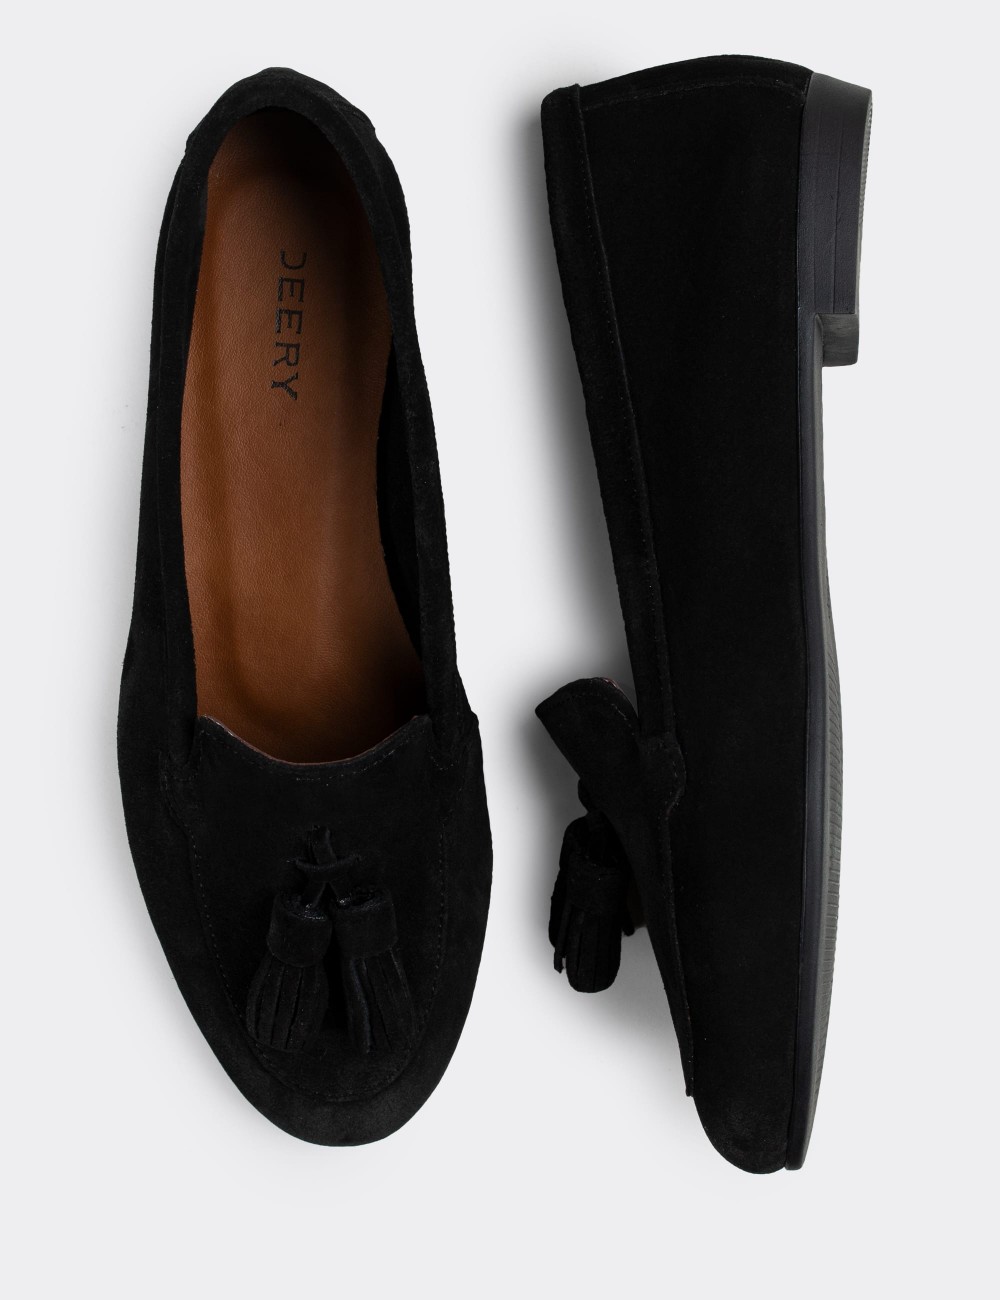 Black Suede Leather Loafers - E3209ZSYHC01